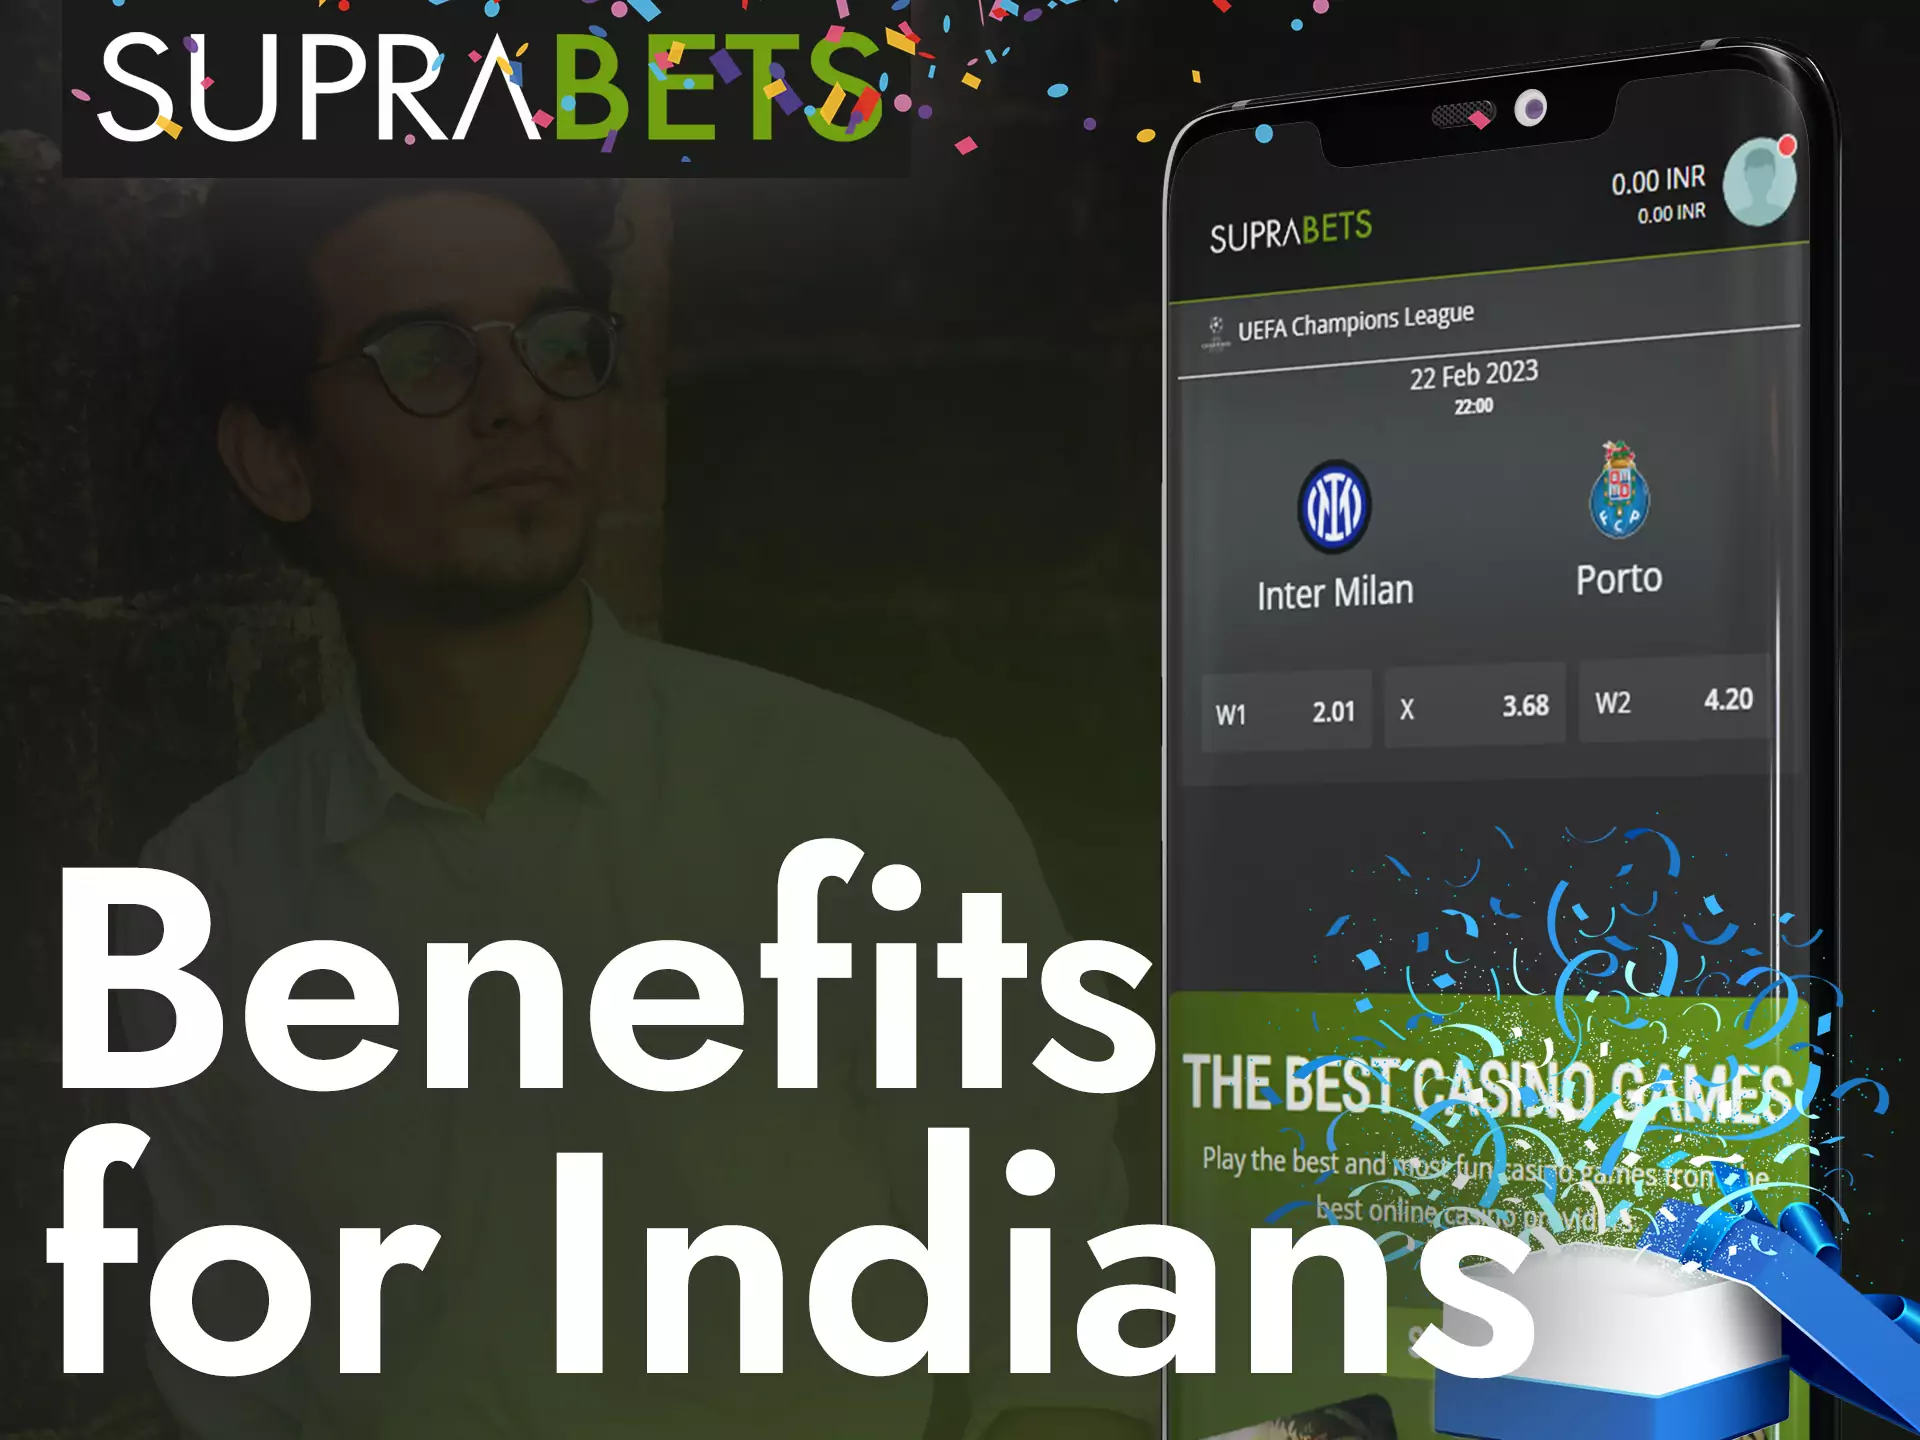 Suprabets offers players from India a lot of bonuses and benefits.